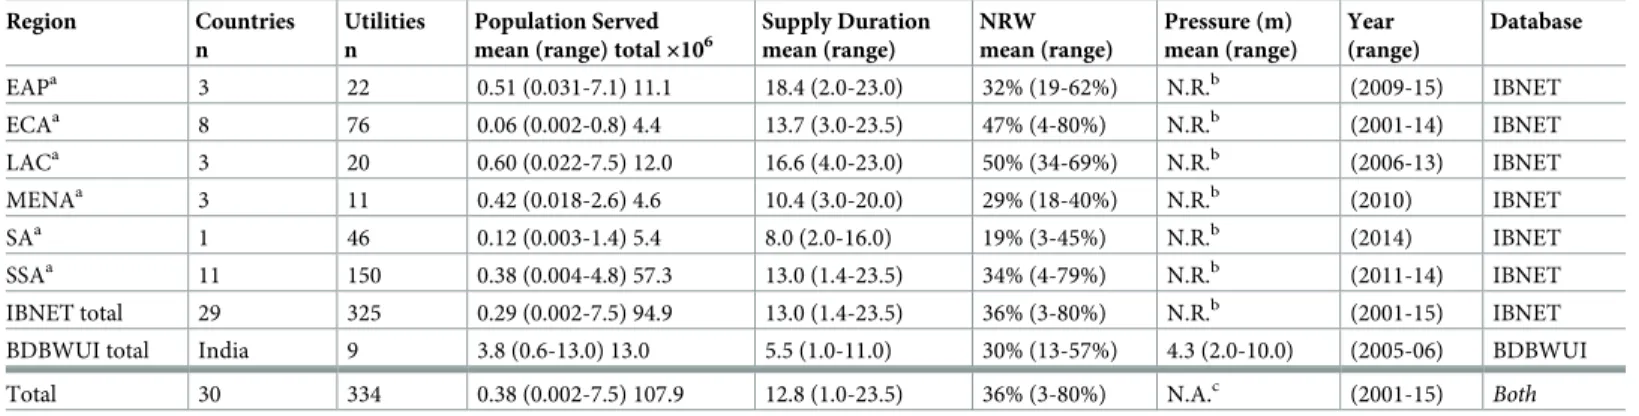 Table 1. Characteristics of IWS in the filtered IBNET and BDBWUI databases, subtotaled and combined.